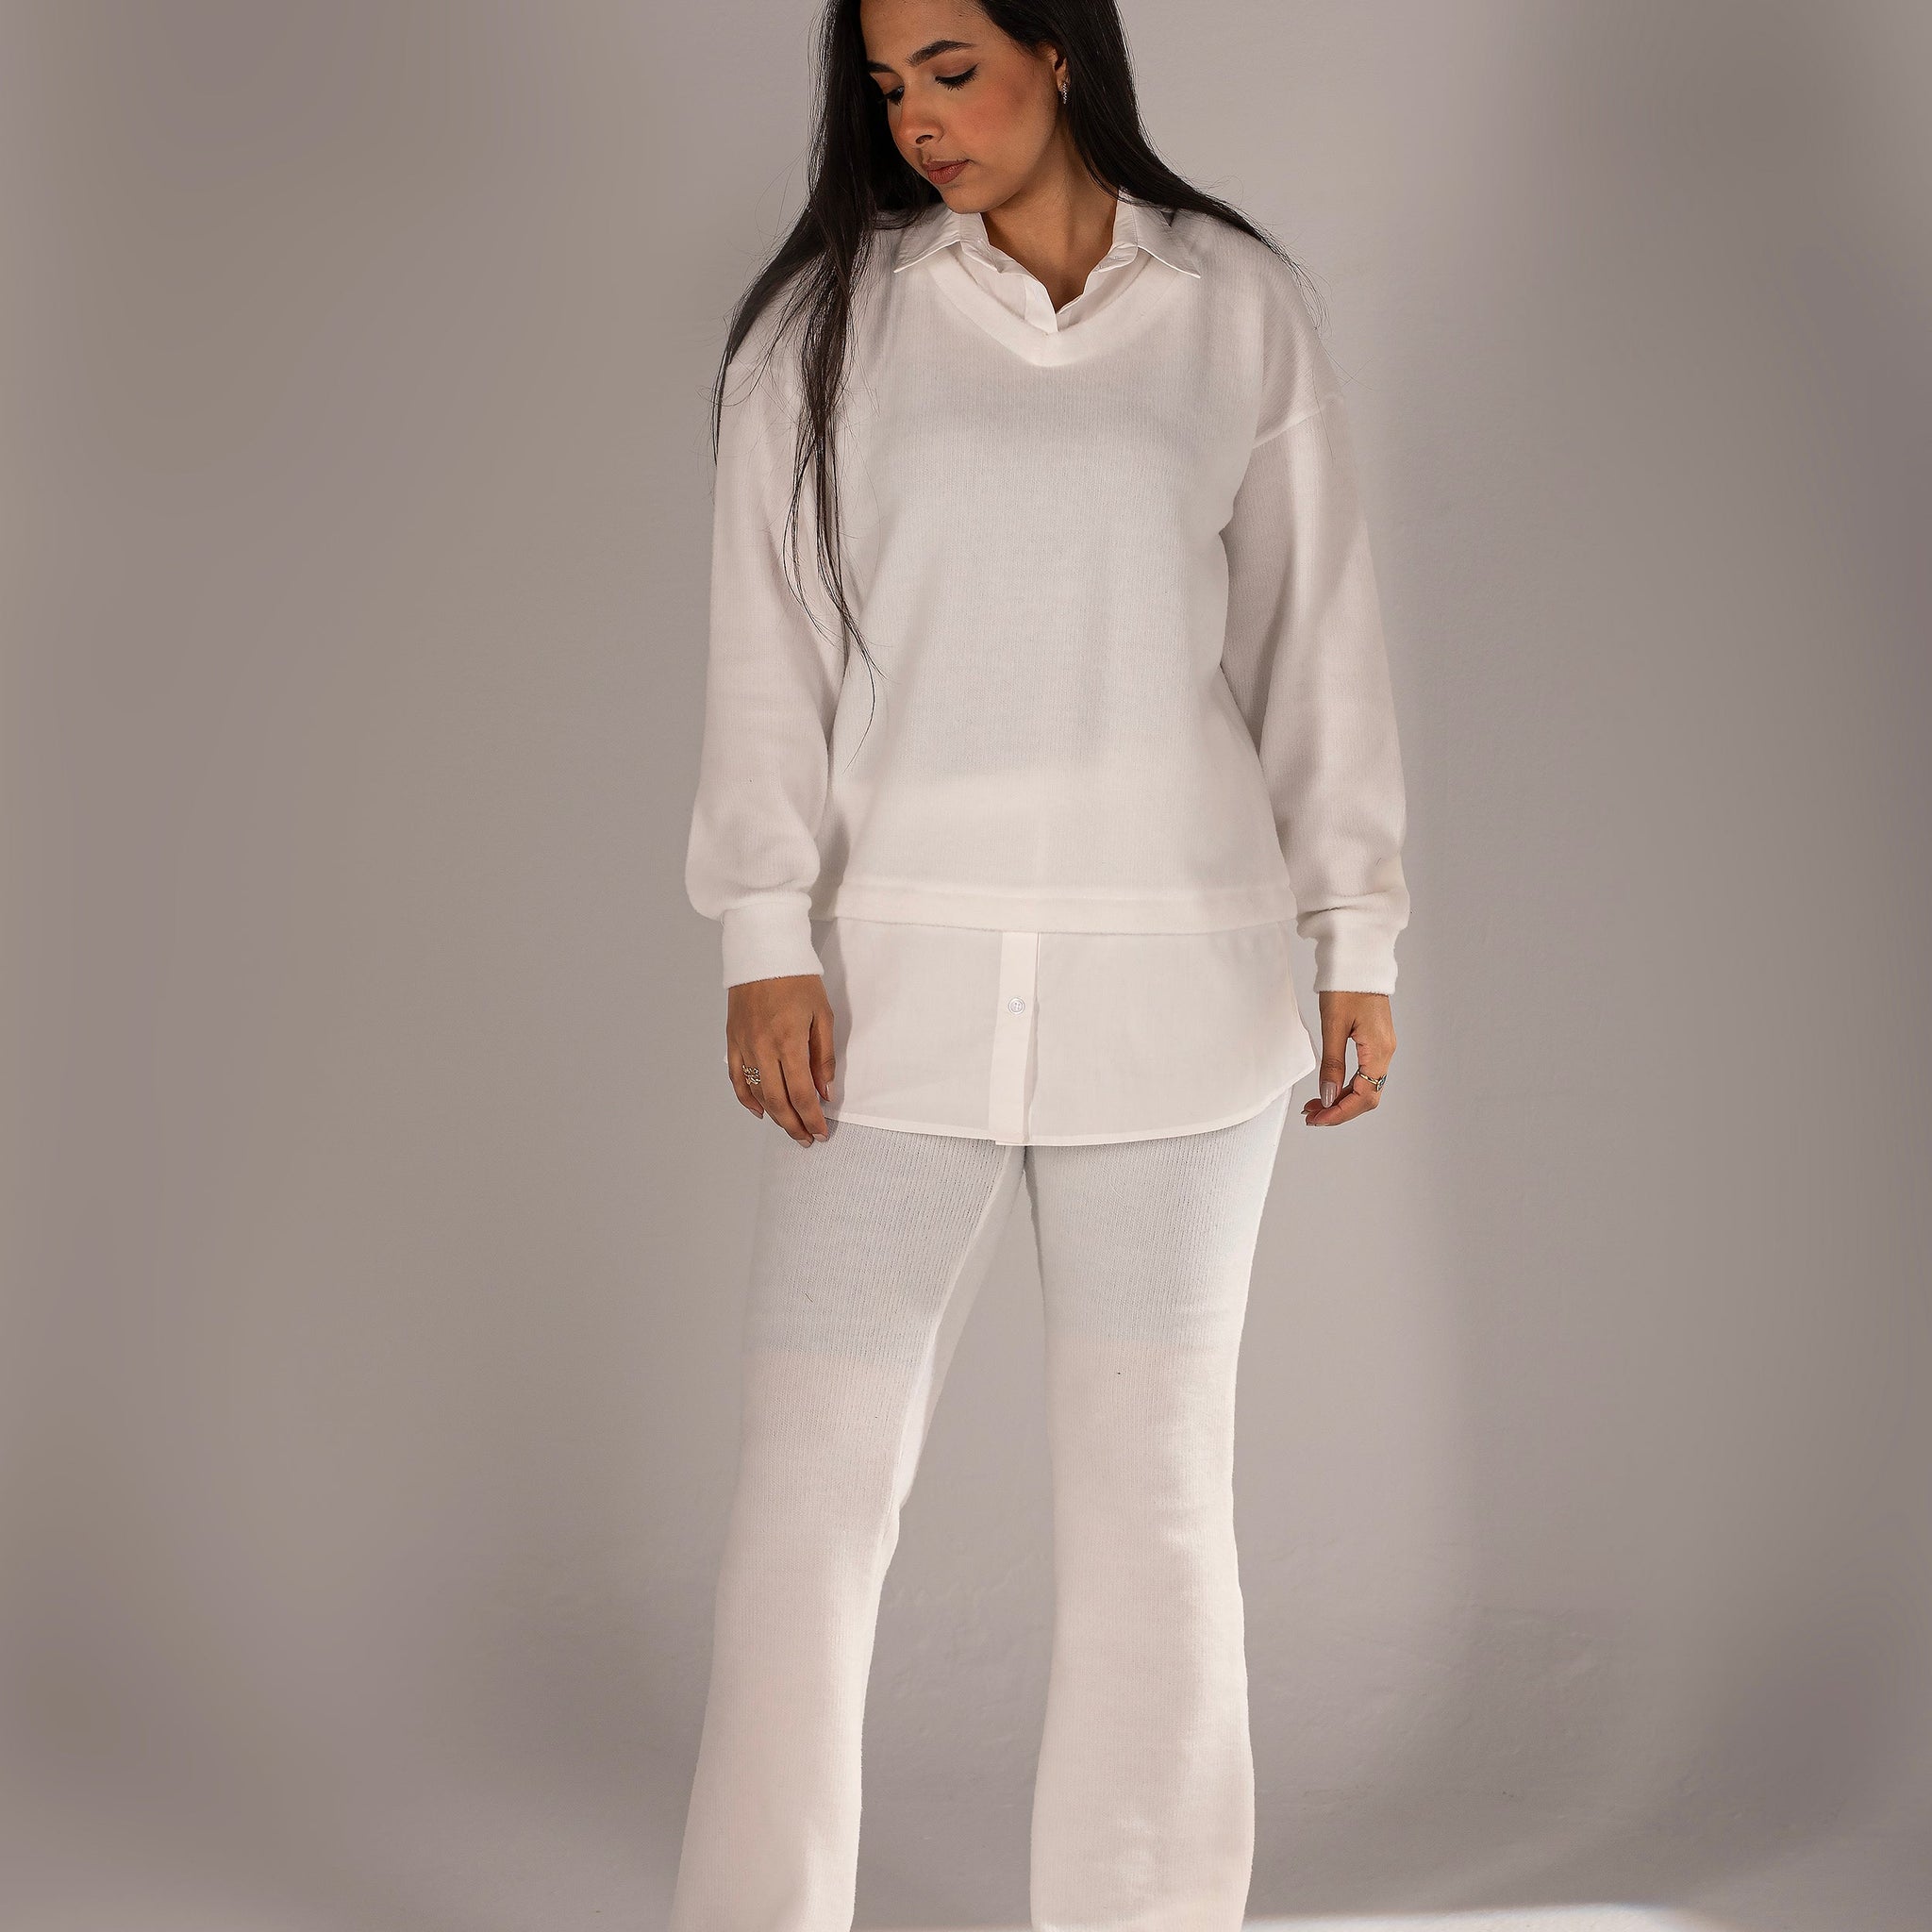 White Wool Suit With Chemise